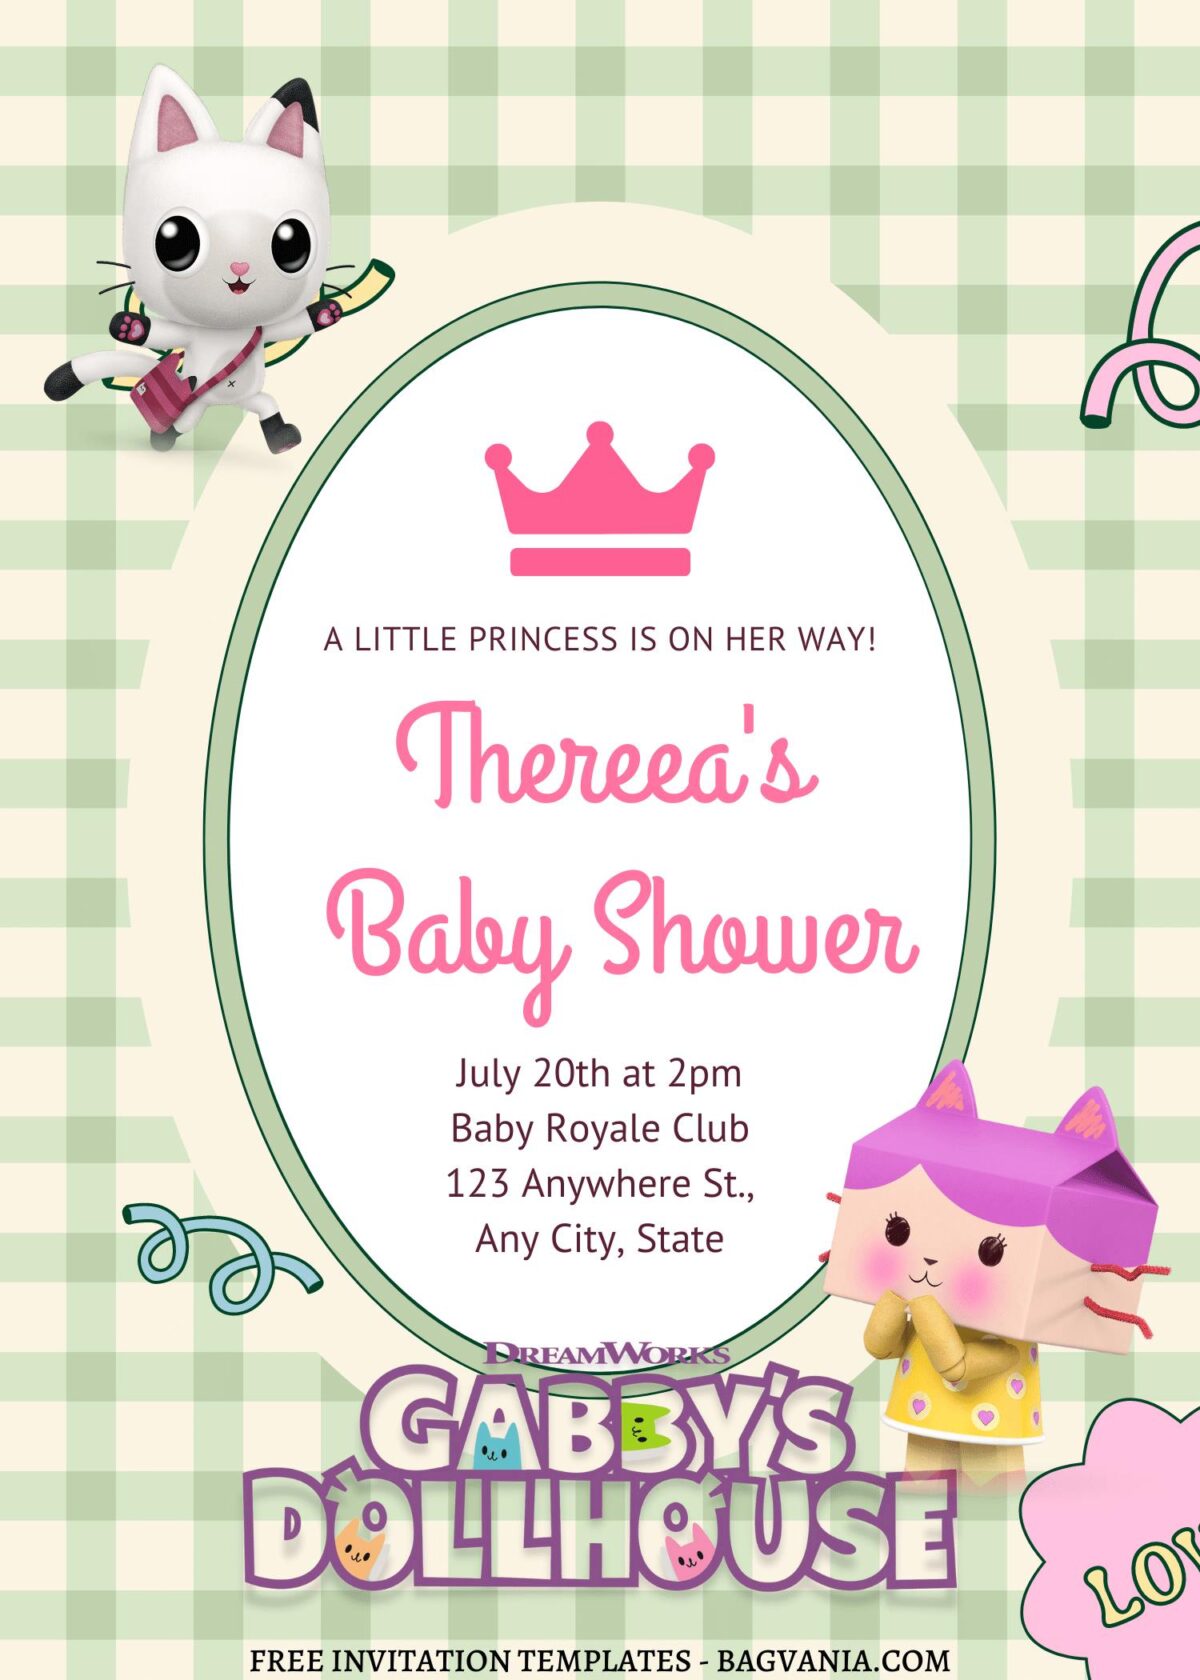 7+ Gabby Dollhouse And Her Furry Friends Canva Birthday Invitation Templates with beautiful gingham background